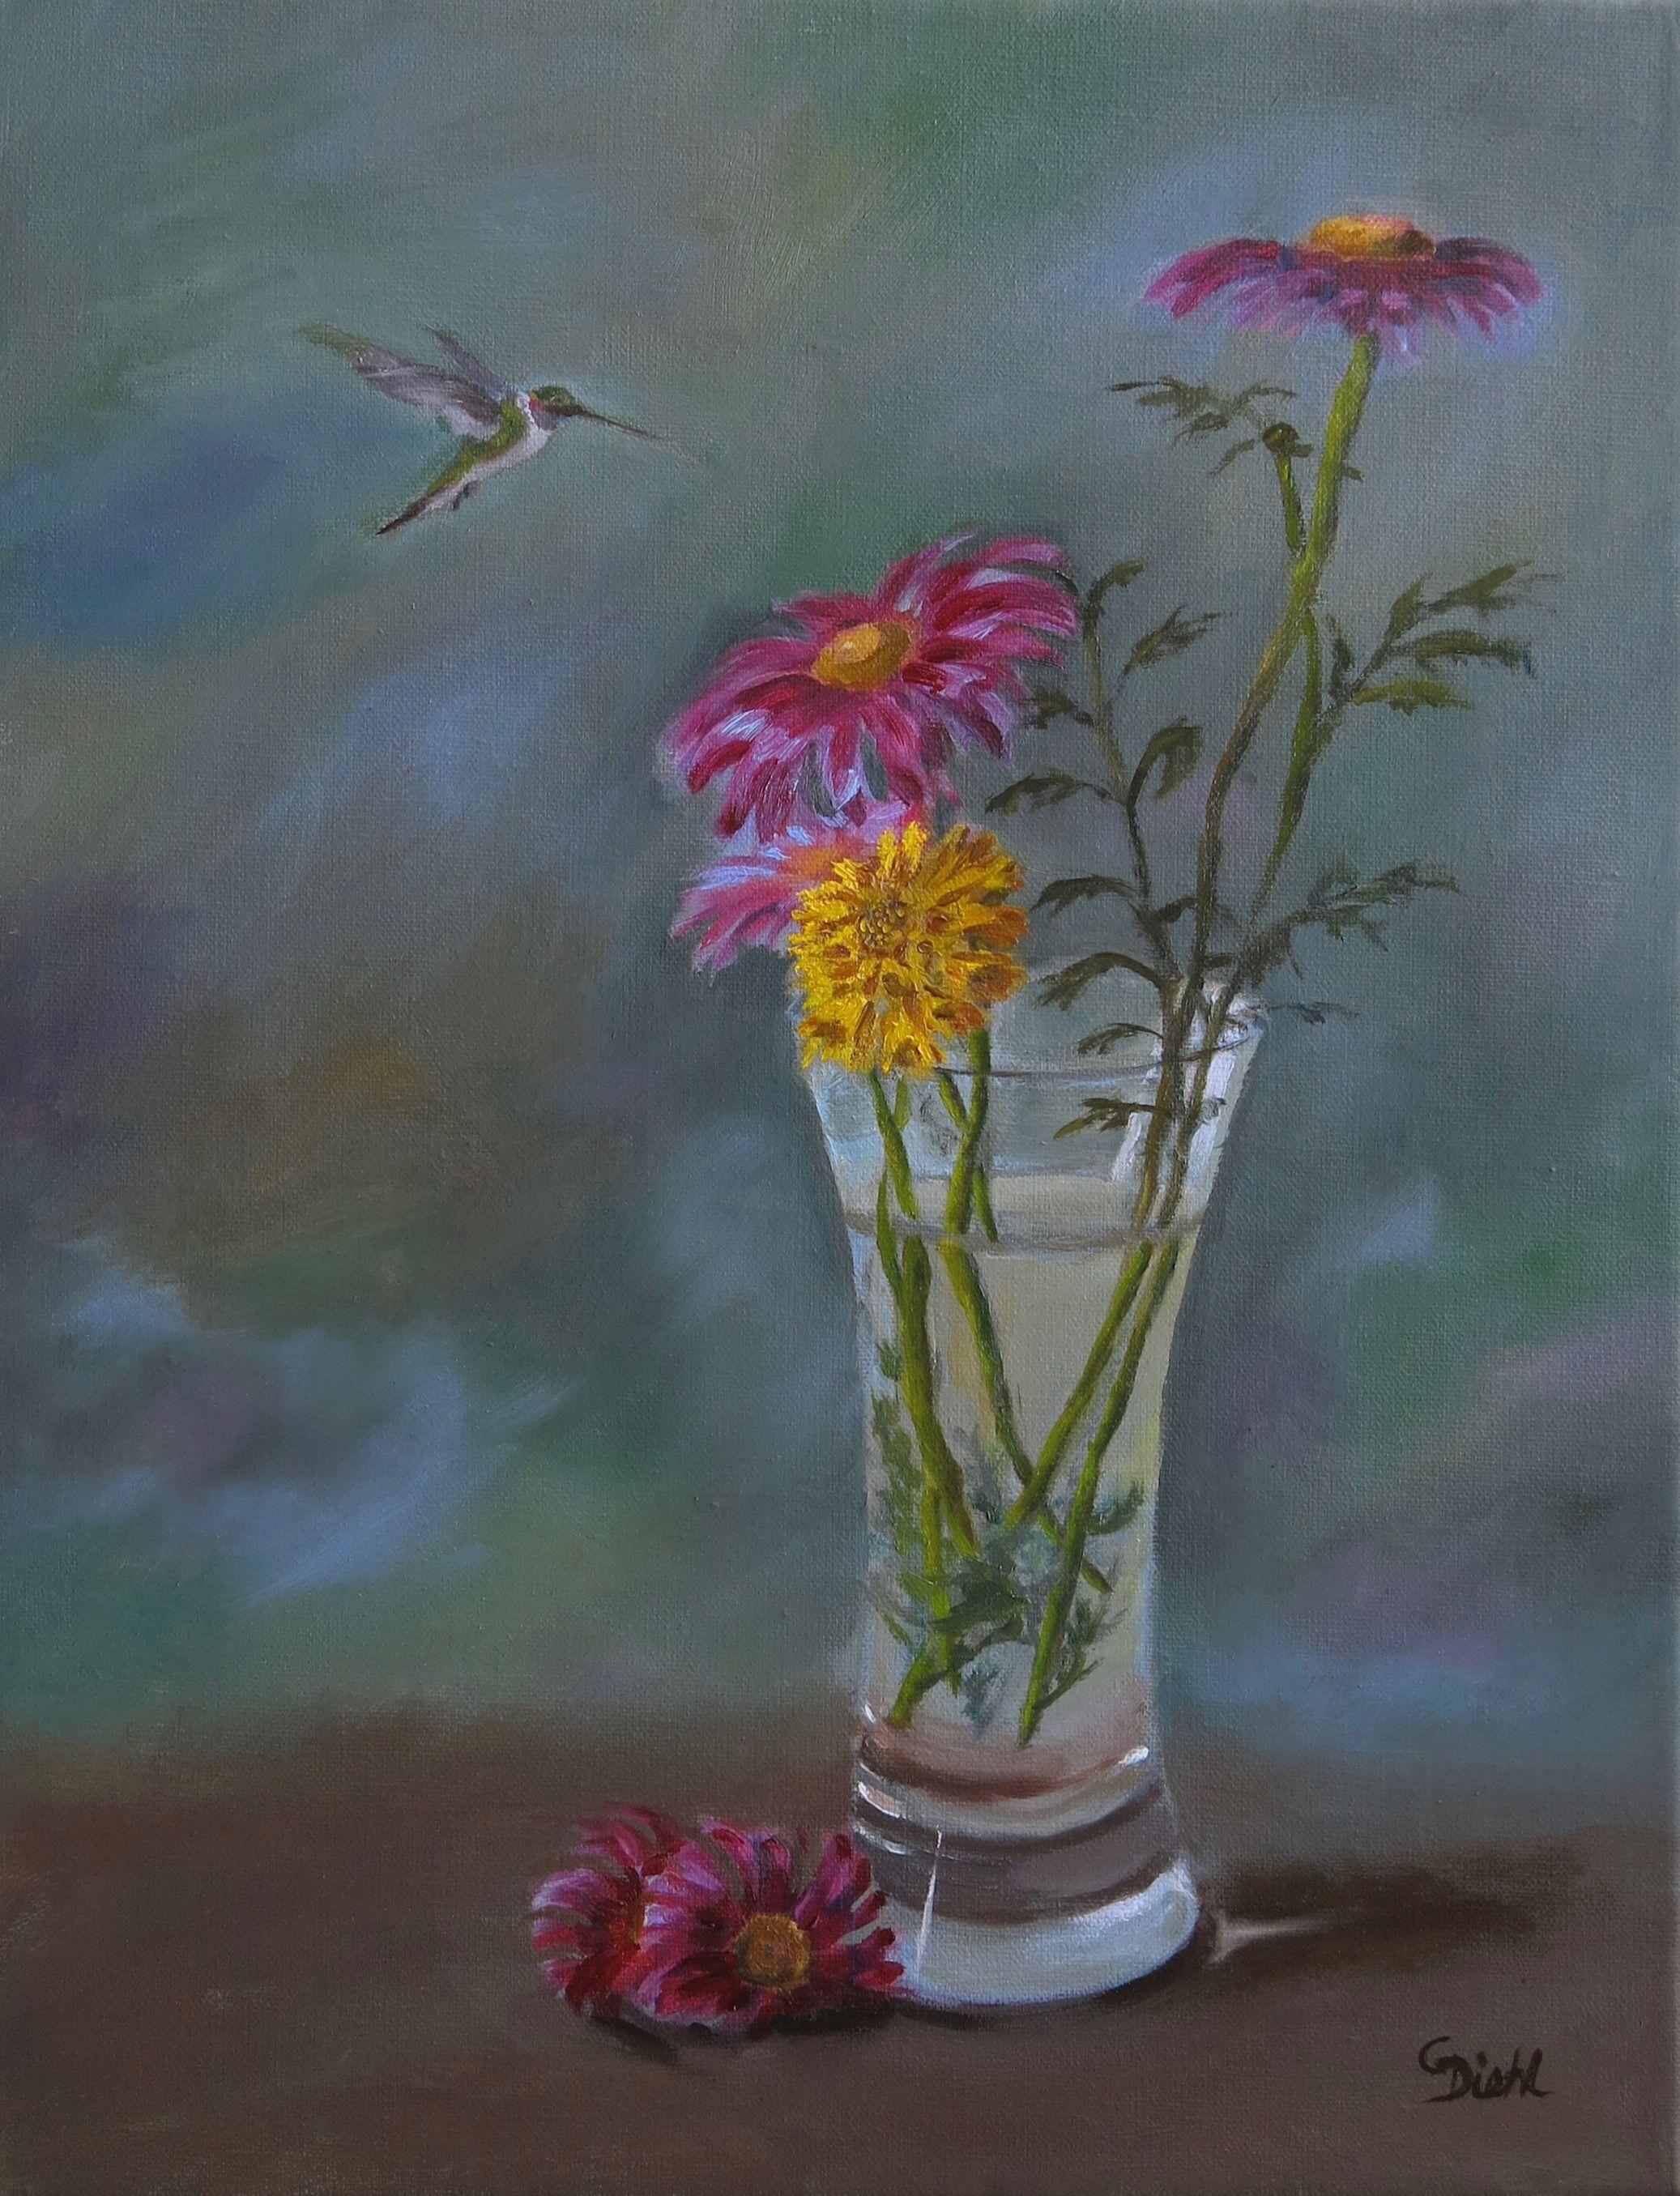 These floral are from my garden. I've placed a yellow Coreopsis flower amongst some painted daisies. A hummingbird has gone to inspect them. It has been painted on a linen stretched canvas in oil paints. This painting won the Special Merit Award in